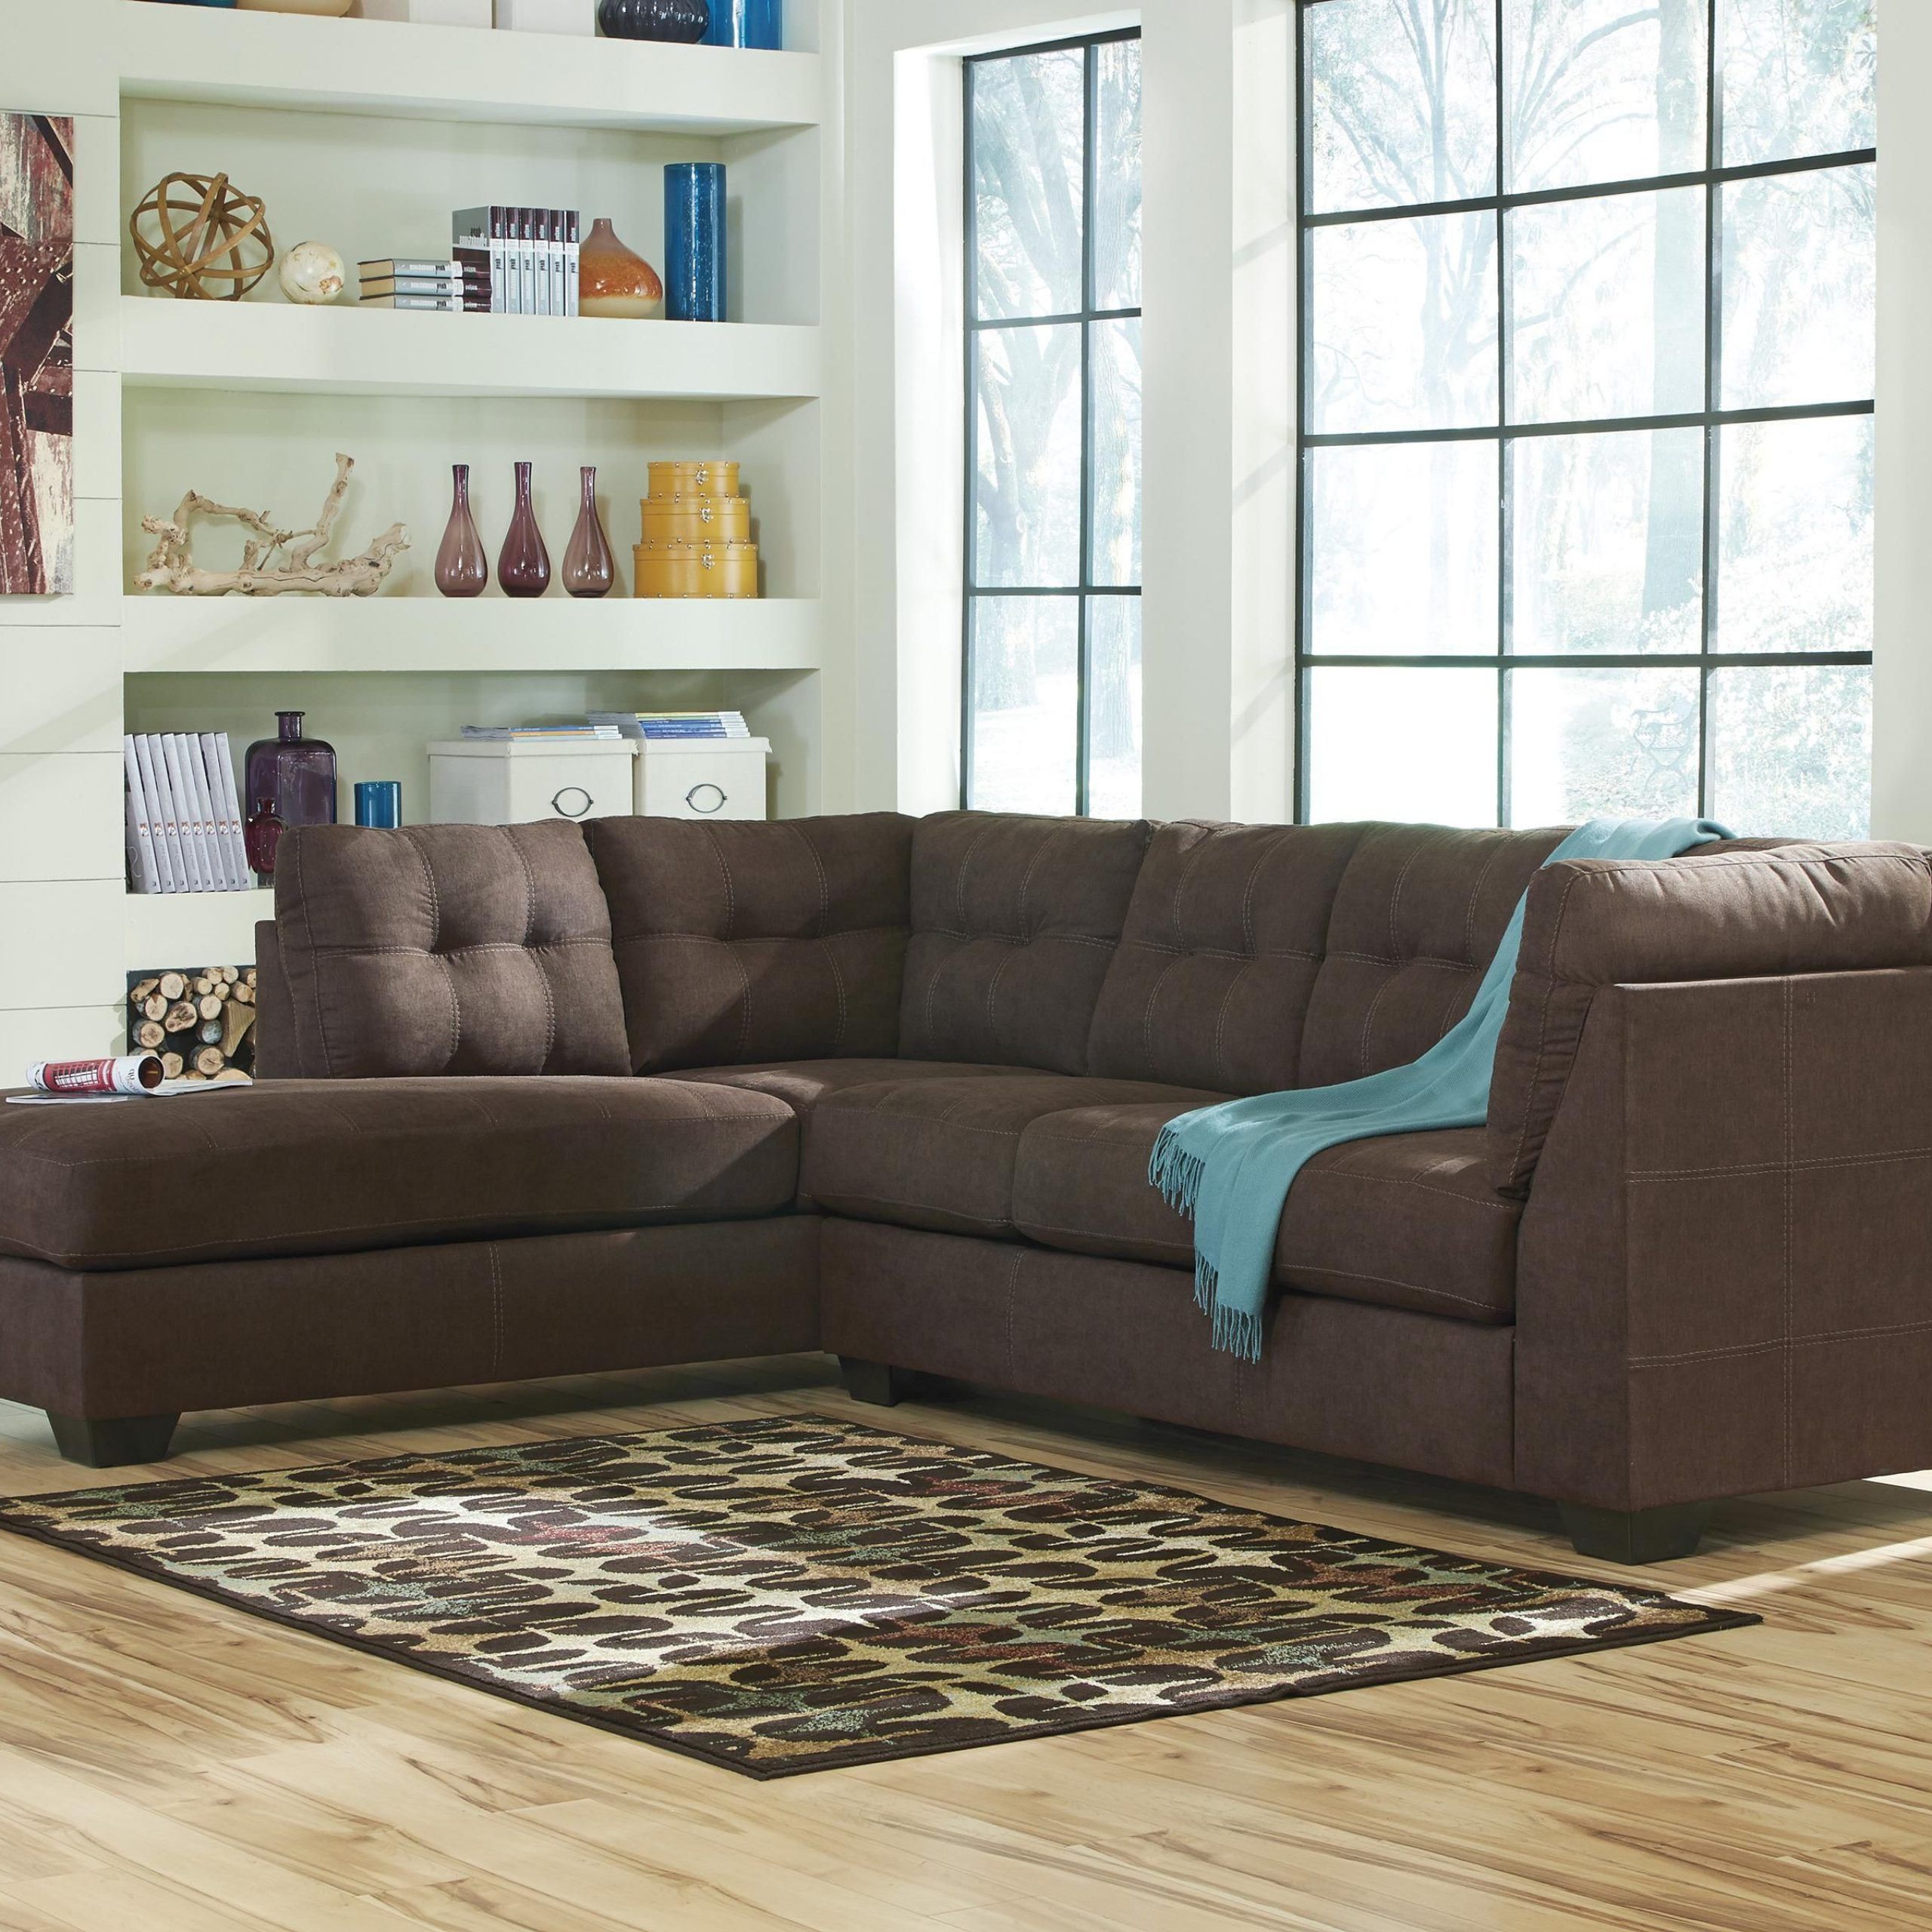 Maier – Walnut 2 Piece Sectional With Left Chaise Pertaining To 2Pc Maddox Right Arm Facing Sectional Sofas With Chaise Brown (View 2 of 15)